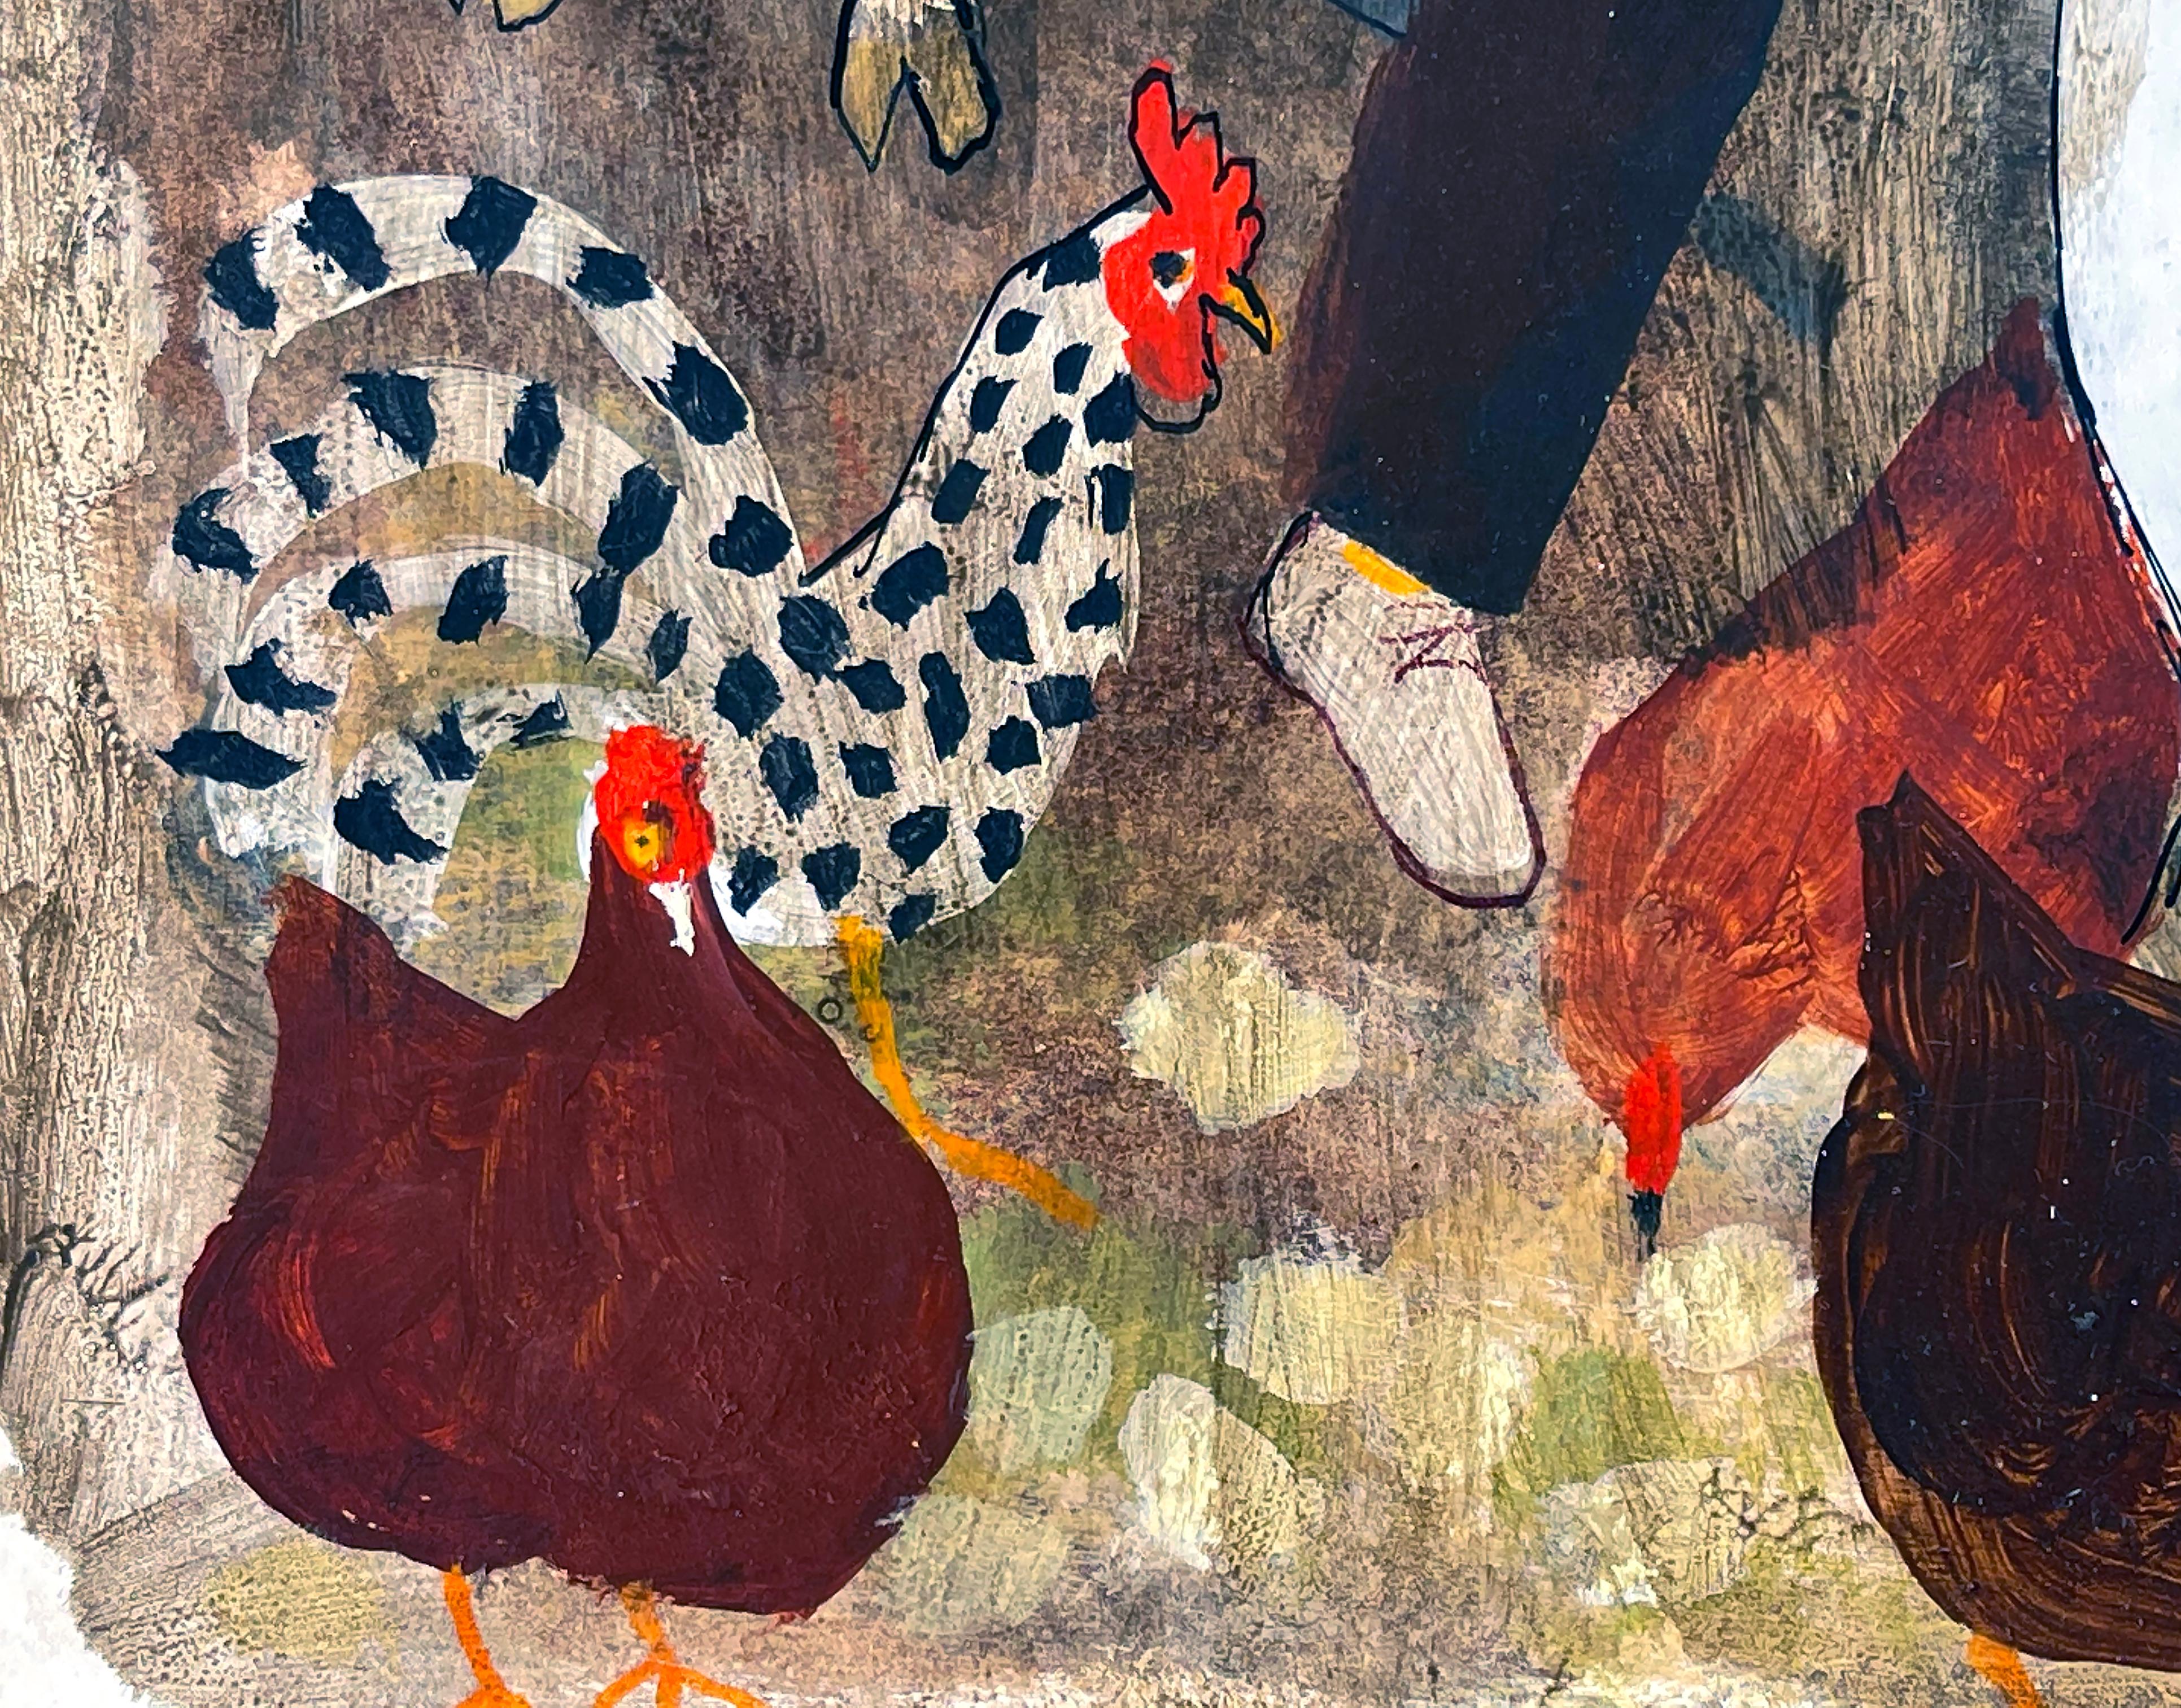 Duck in Farm with Horse, Goat and Chickens.  Children's book illustration - Painting by ALICE and  MARTIN PROVENSEN